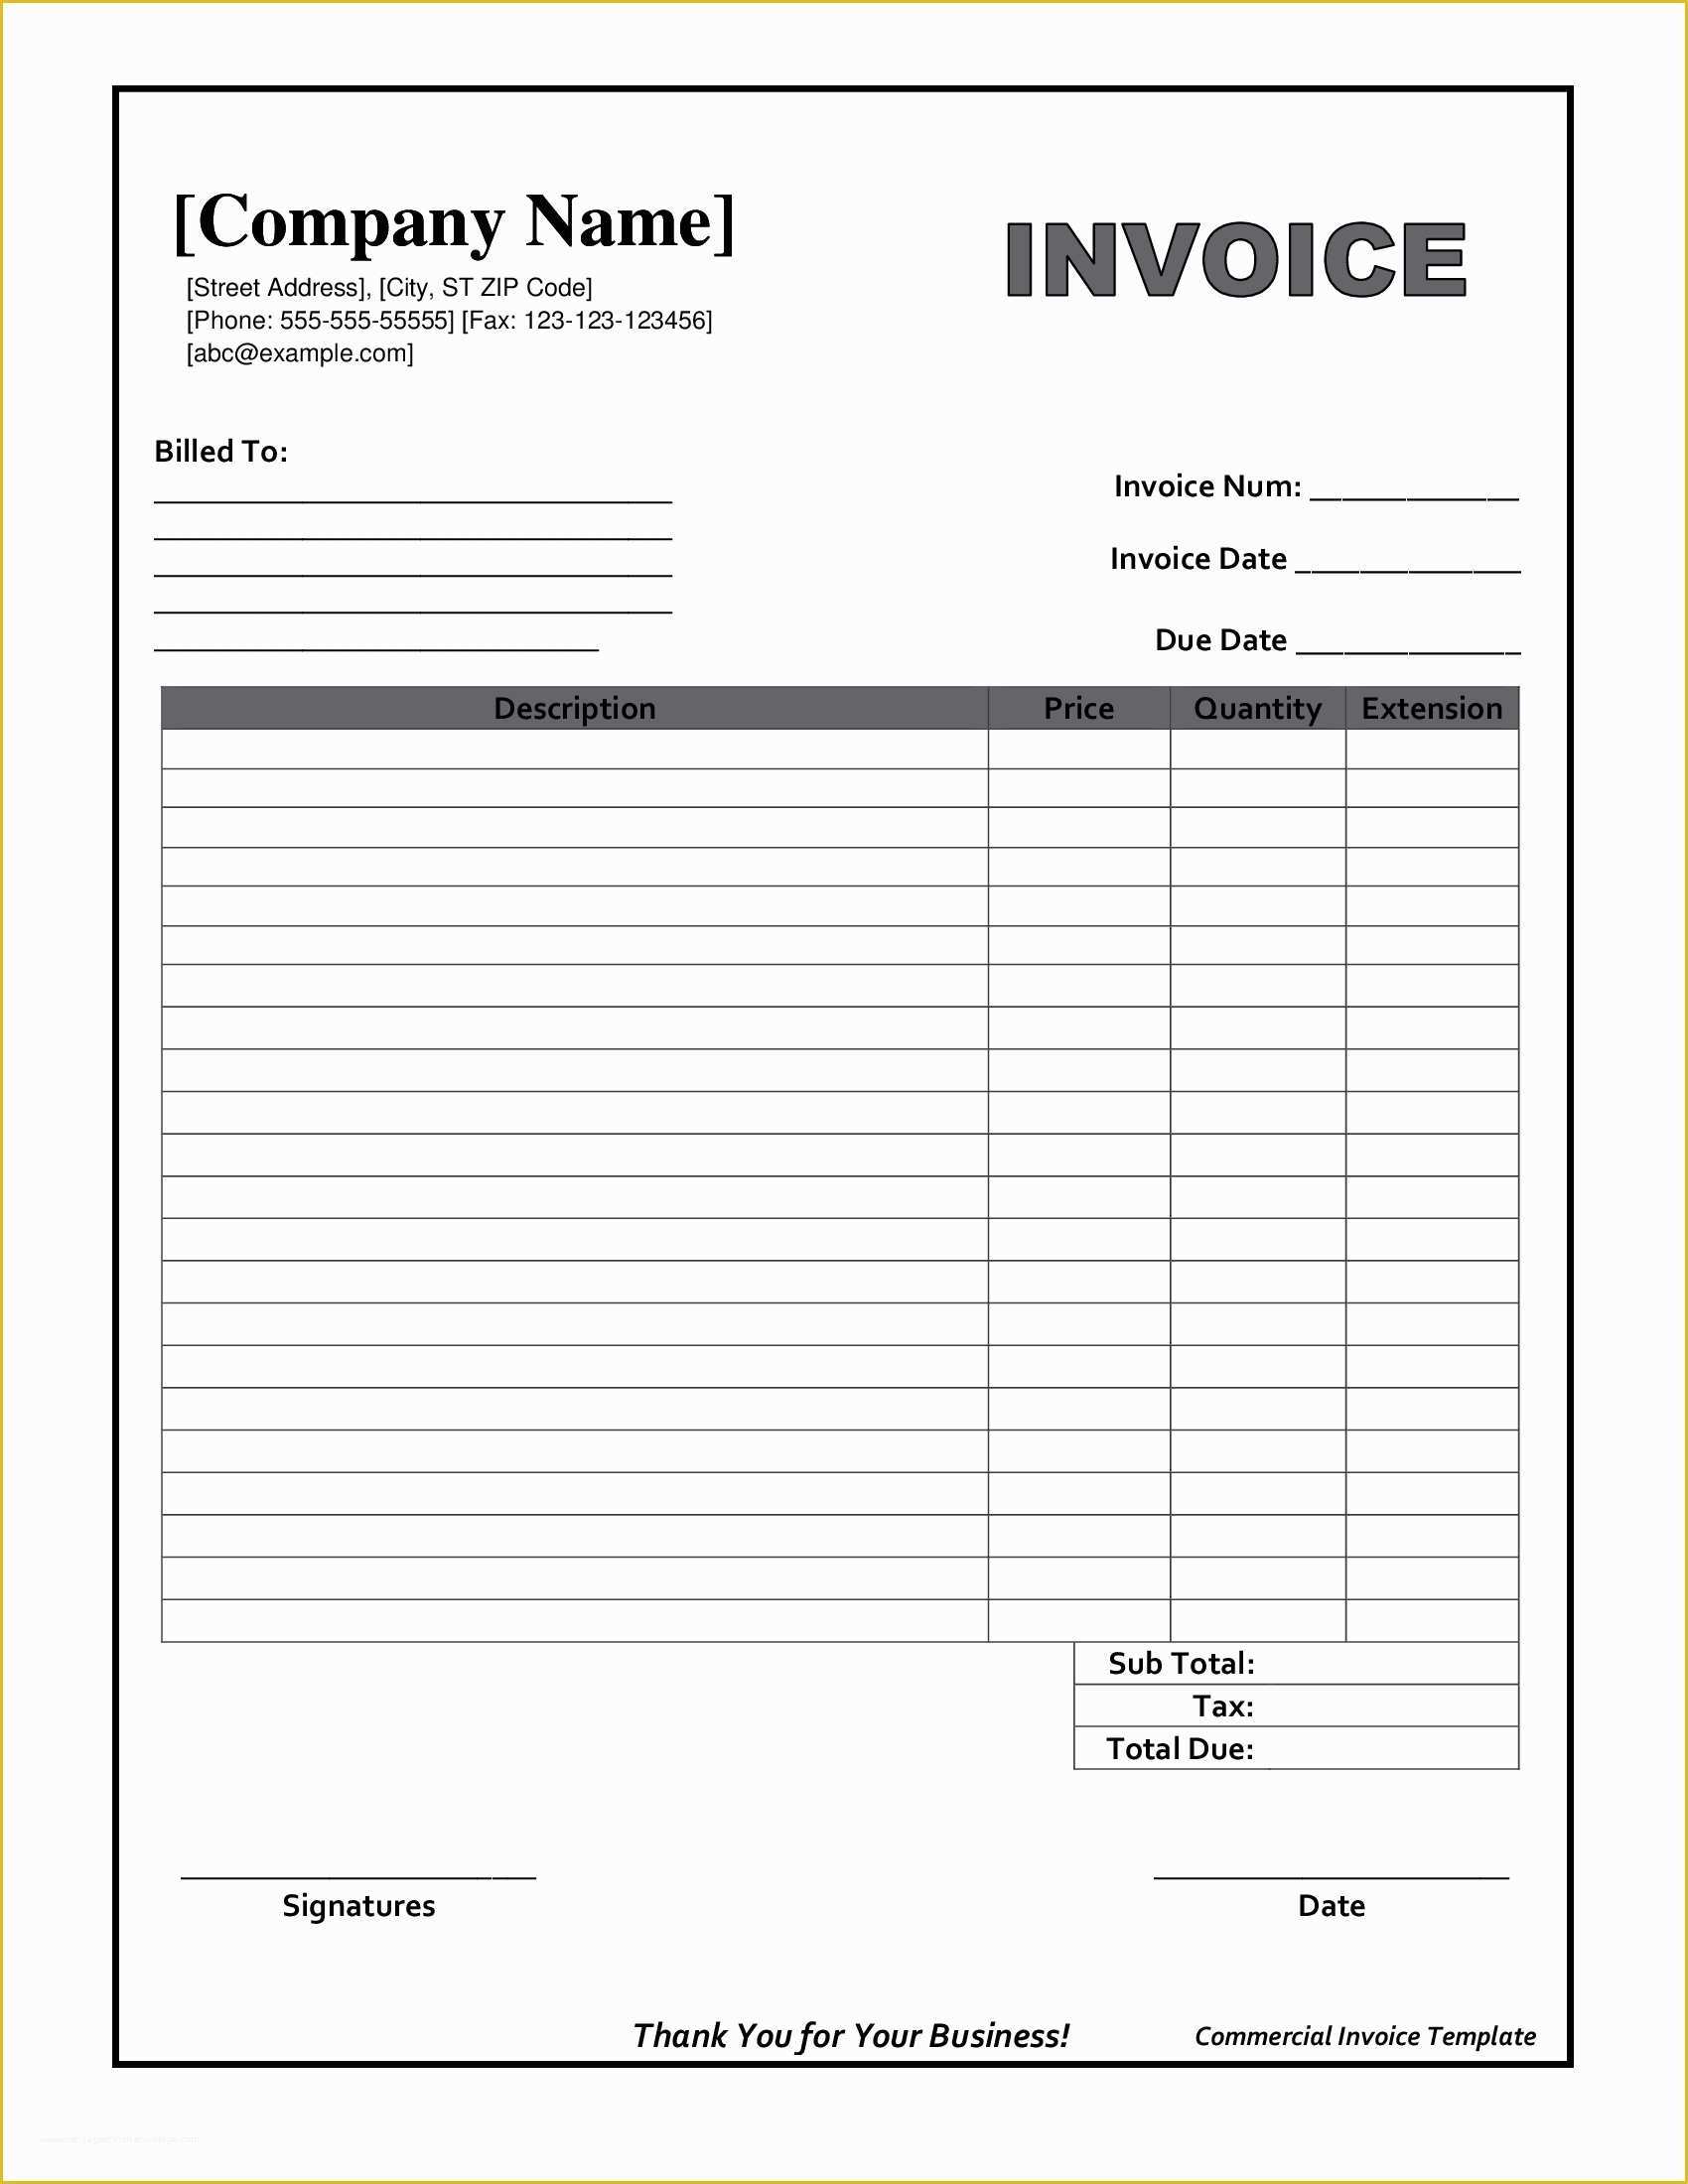 Free Invoice Template Download Of Blank Invoice form Free